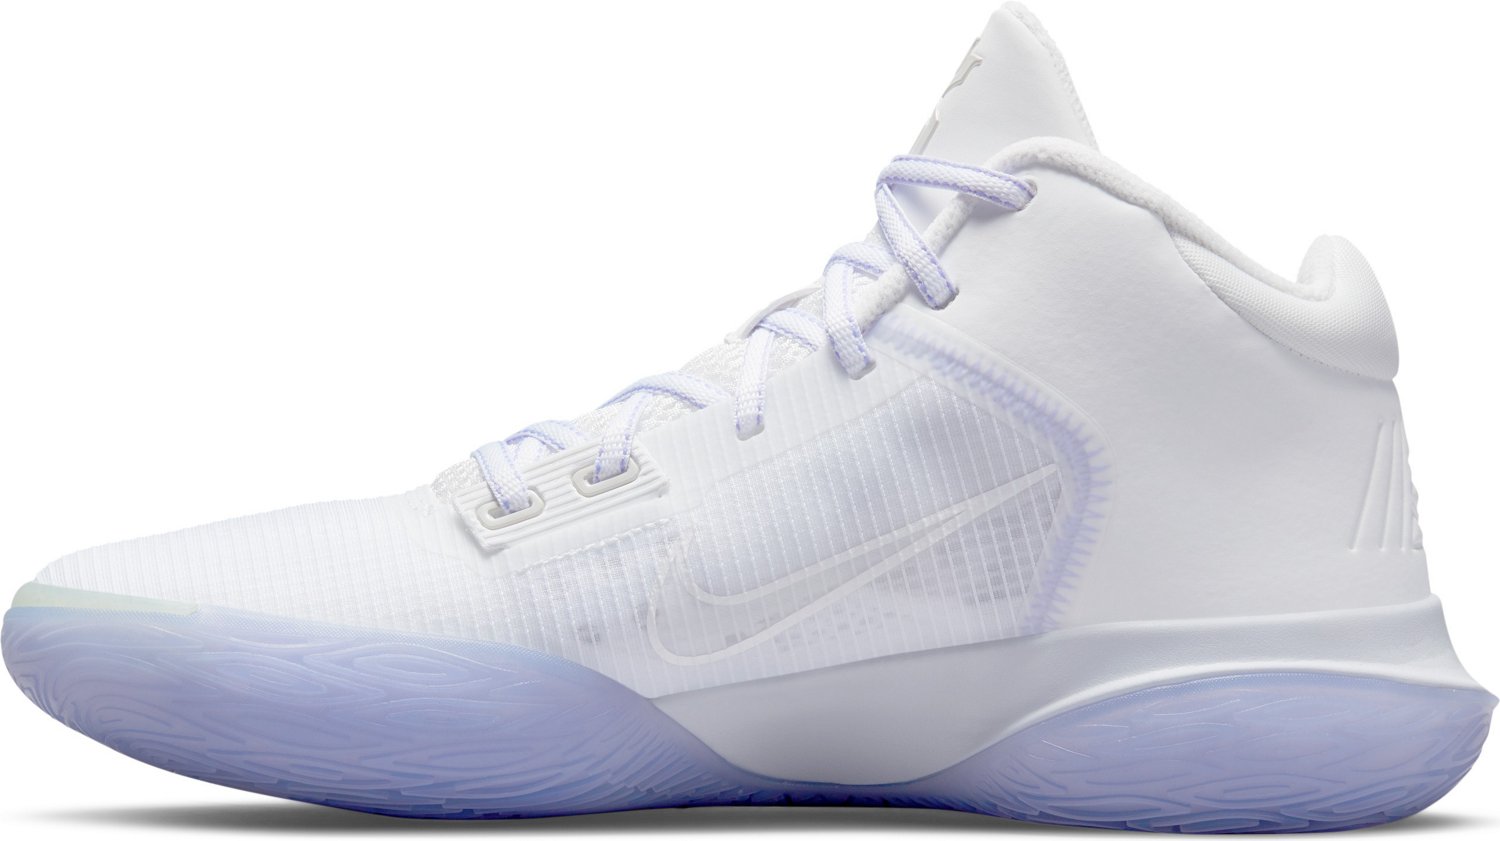 Nike Adults' Kyrie Flytrap IV Basketball Shoes | Academy